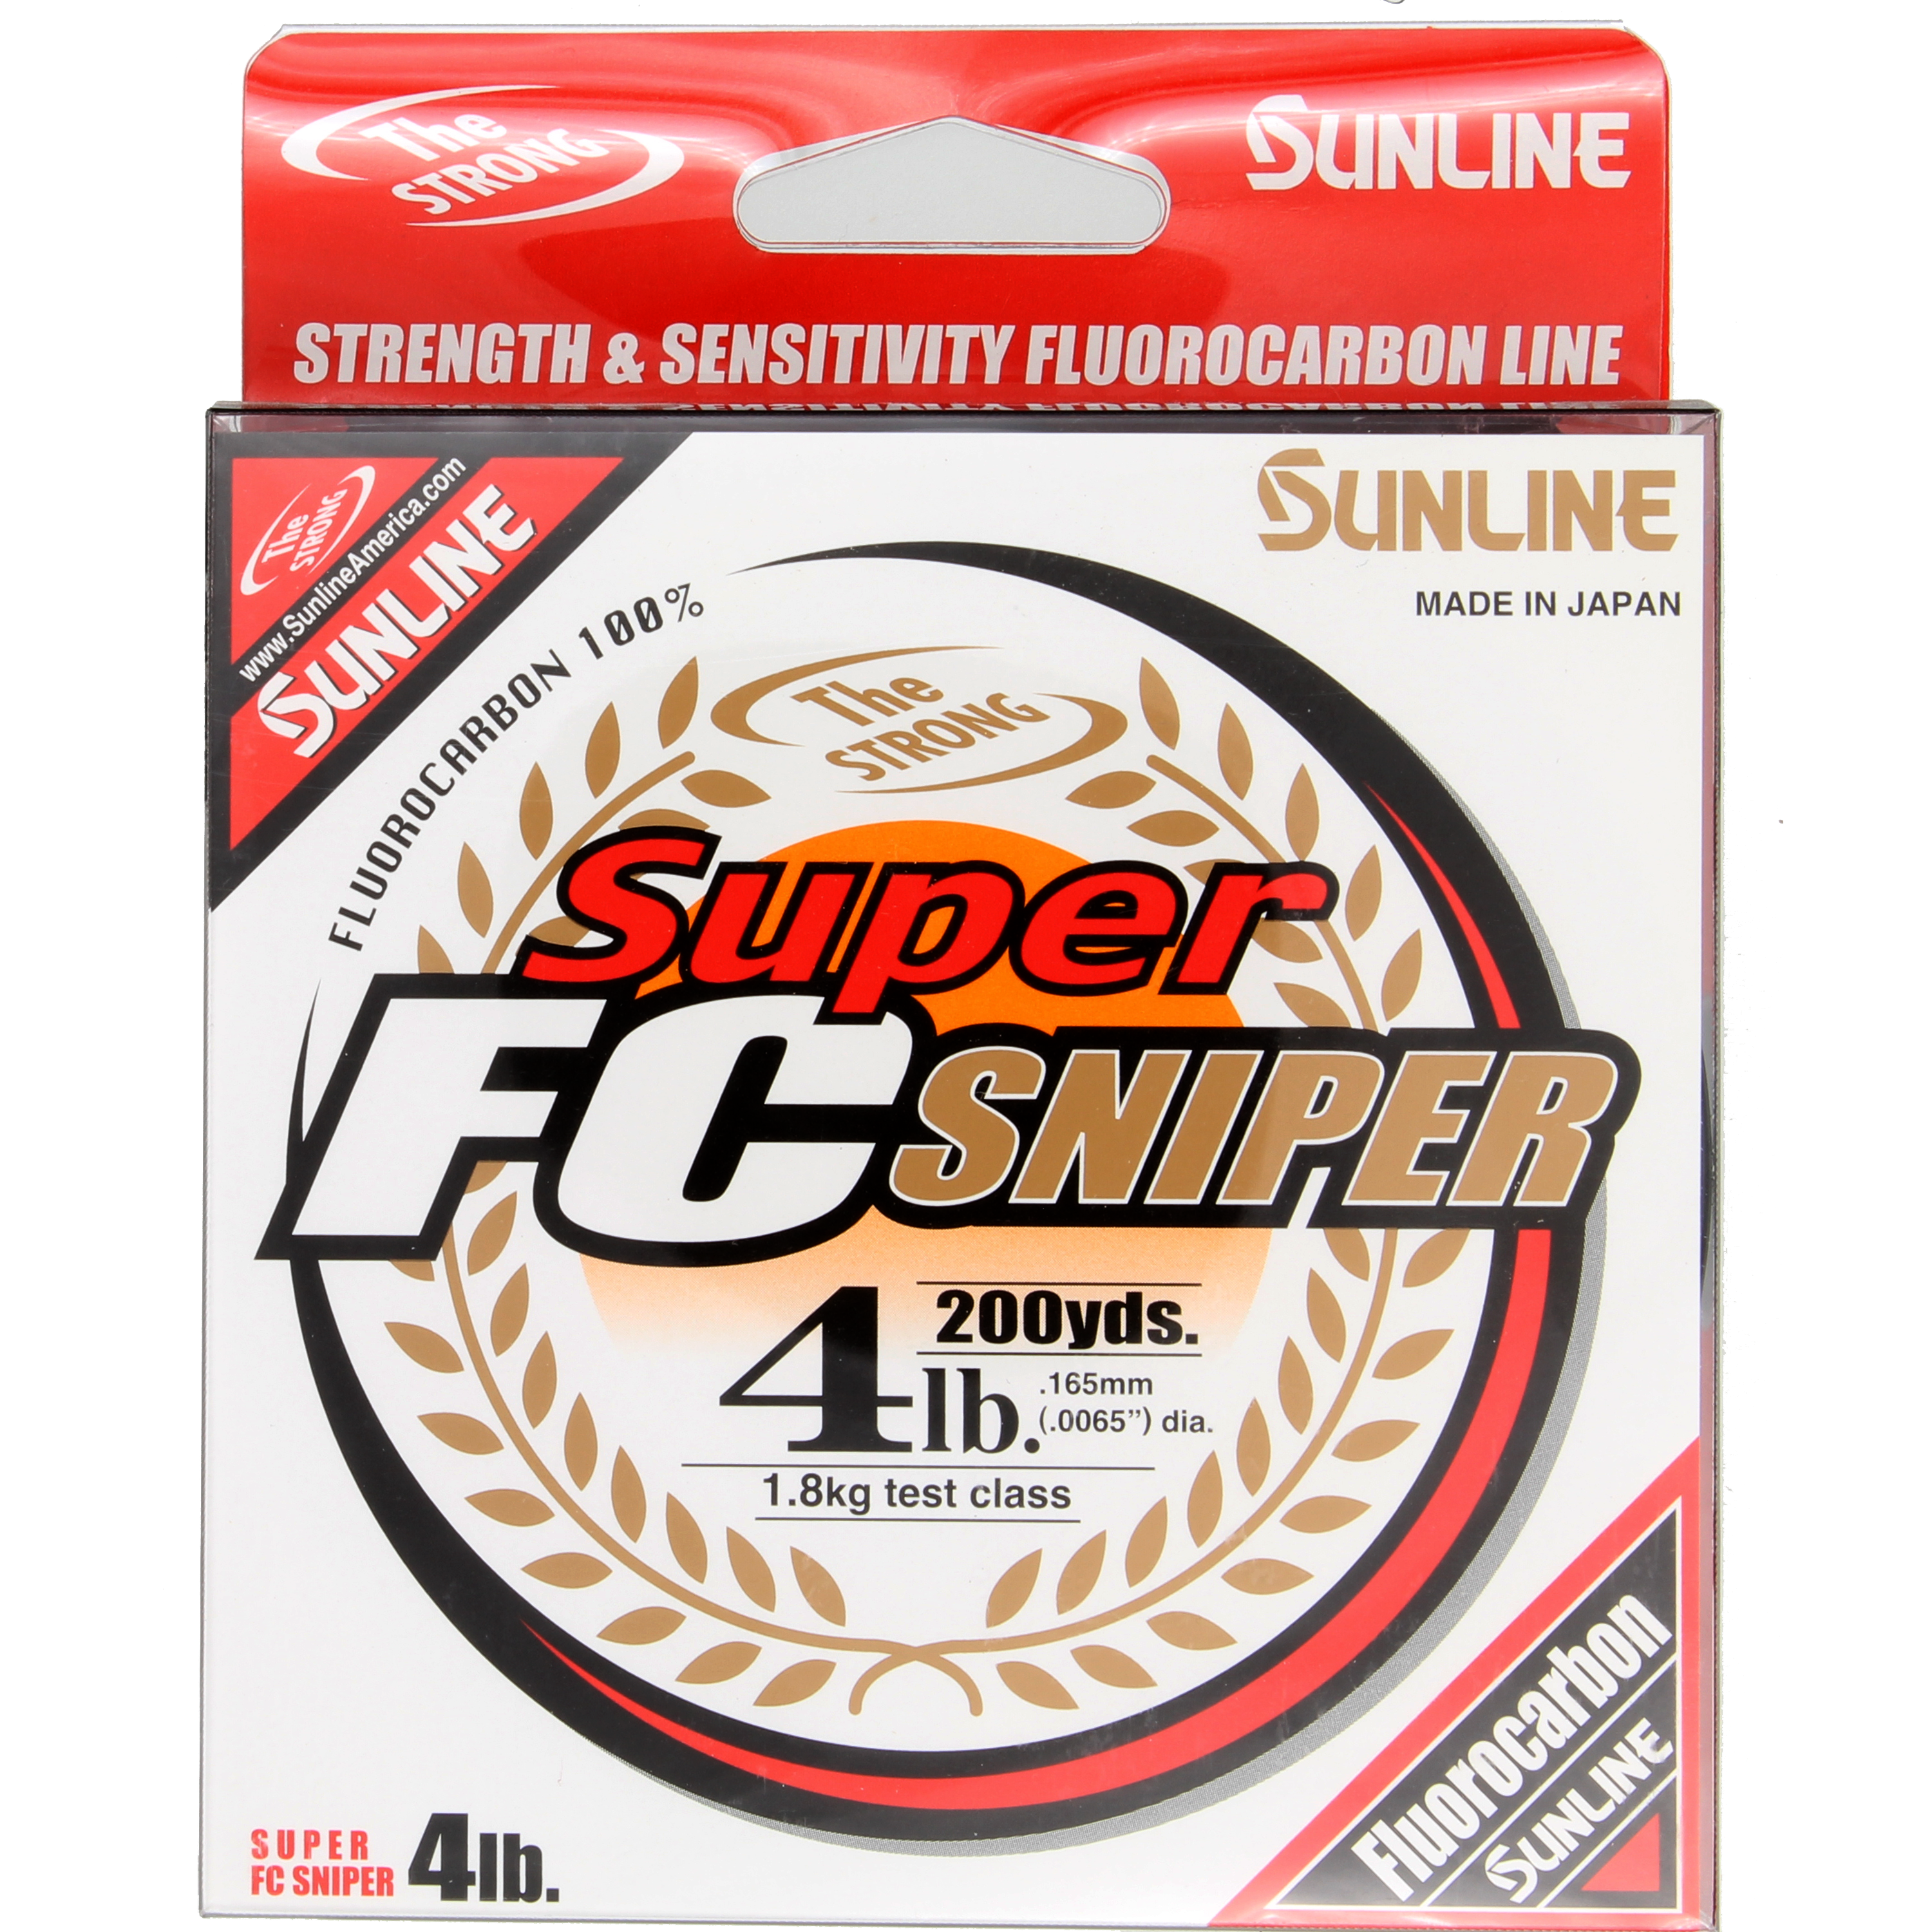 Order Fluorocarbon Fishing Line, Fishing Material Online, Fluorocarbon